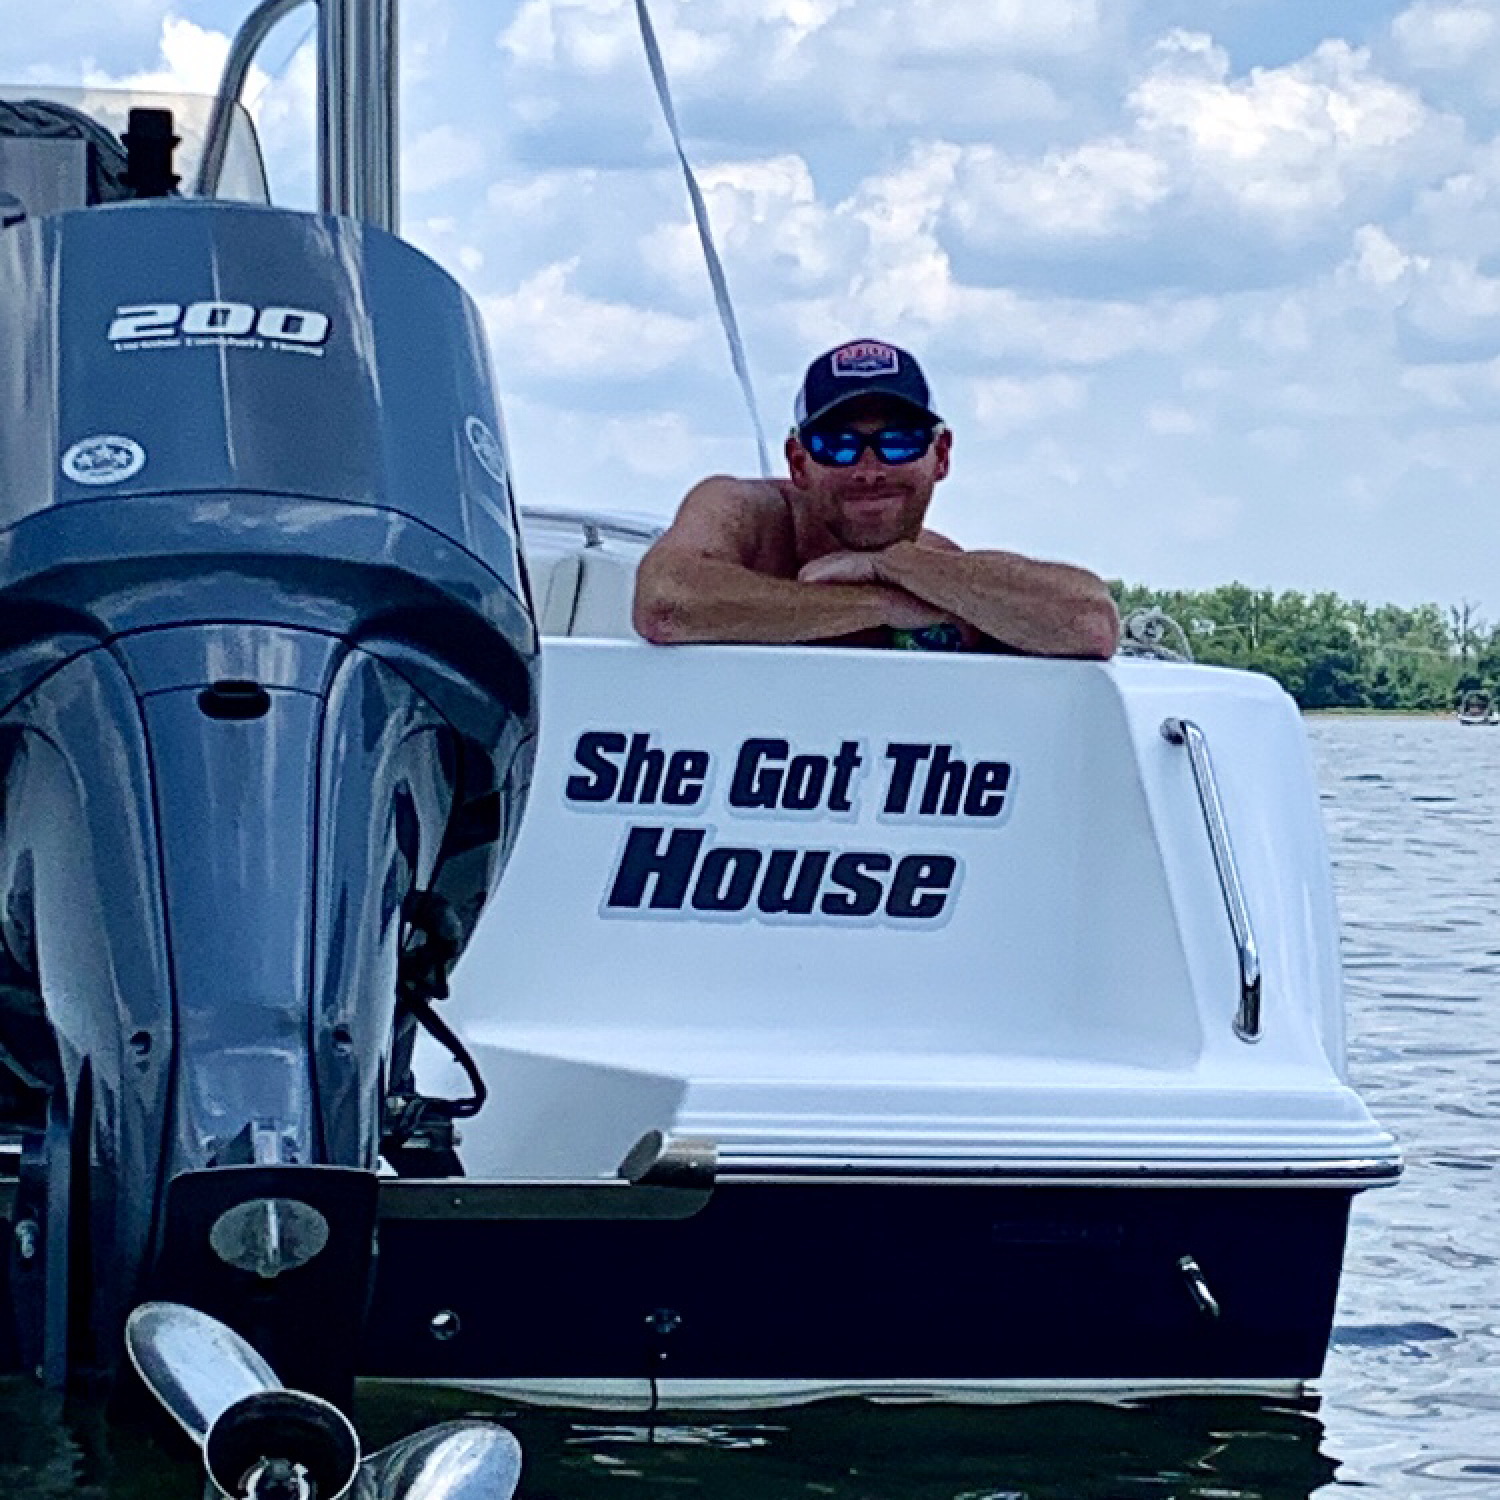 Title: She got the house but not my Sportsman. - On board their Sportsman Heritage 231 Center Console - Location: James River VA. Participating in the Photo Contest #SportsmanJune2021